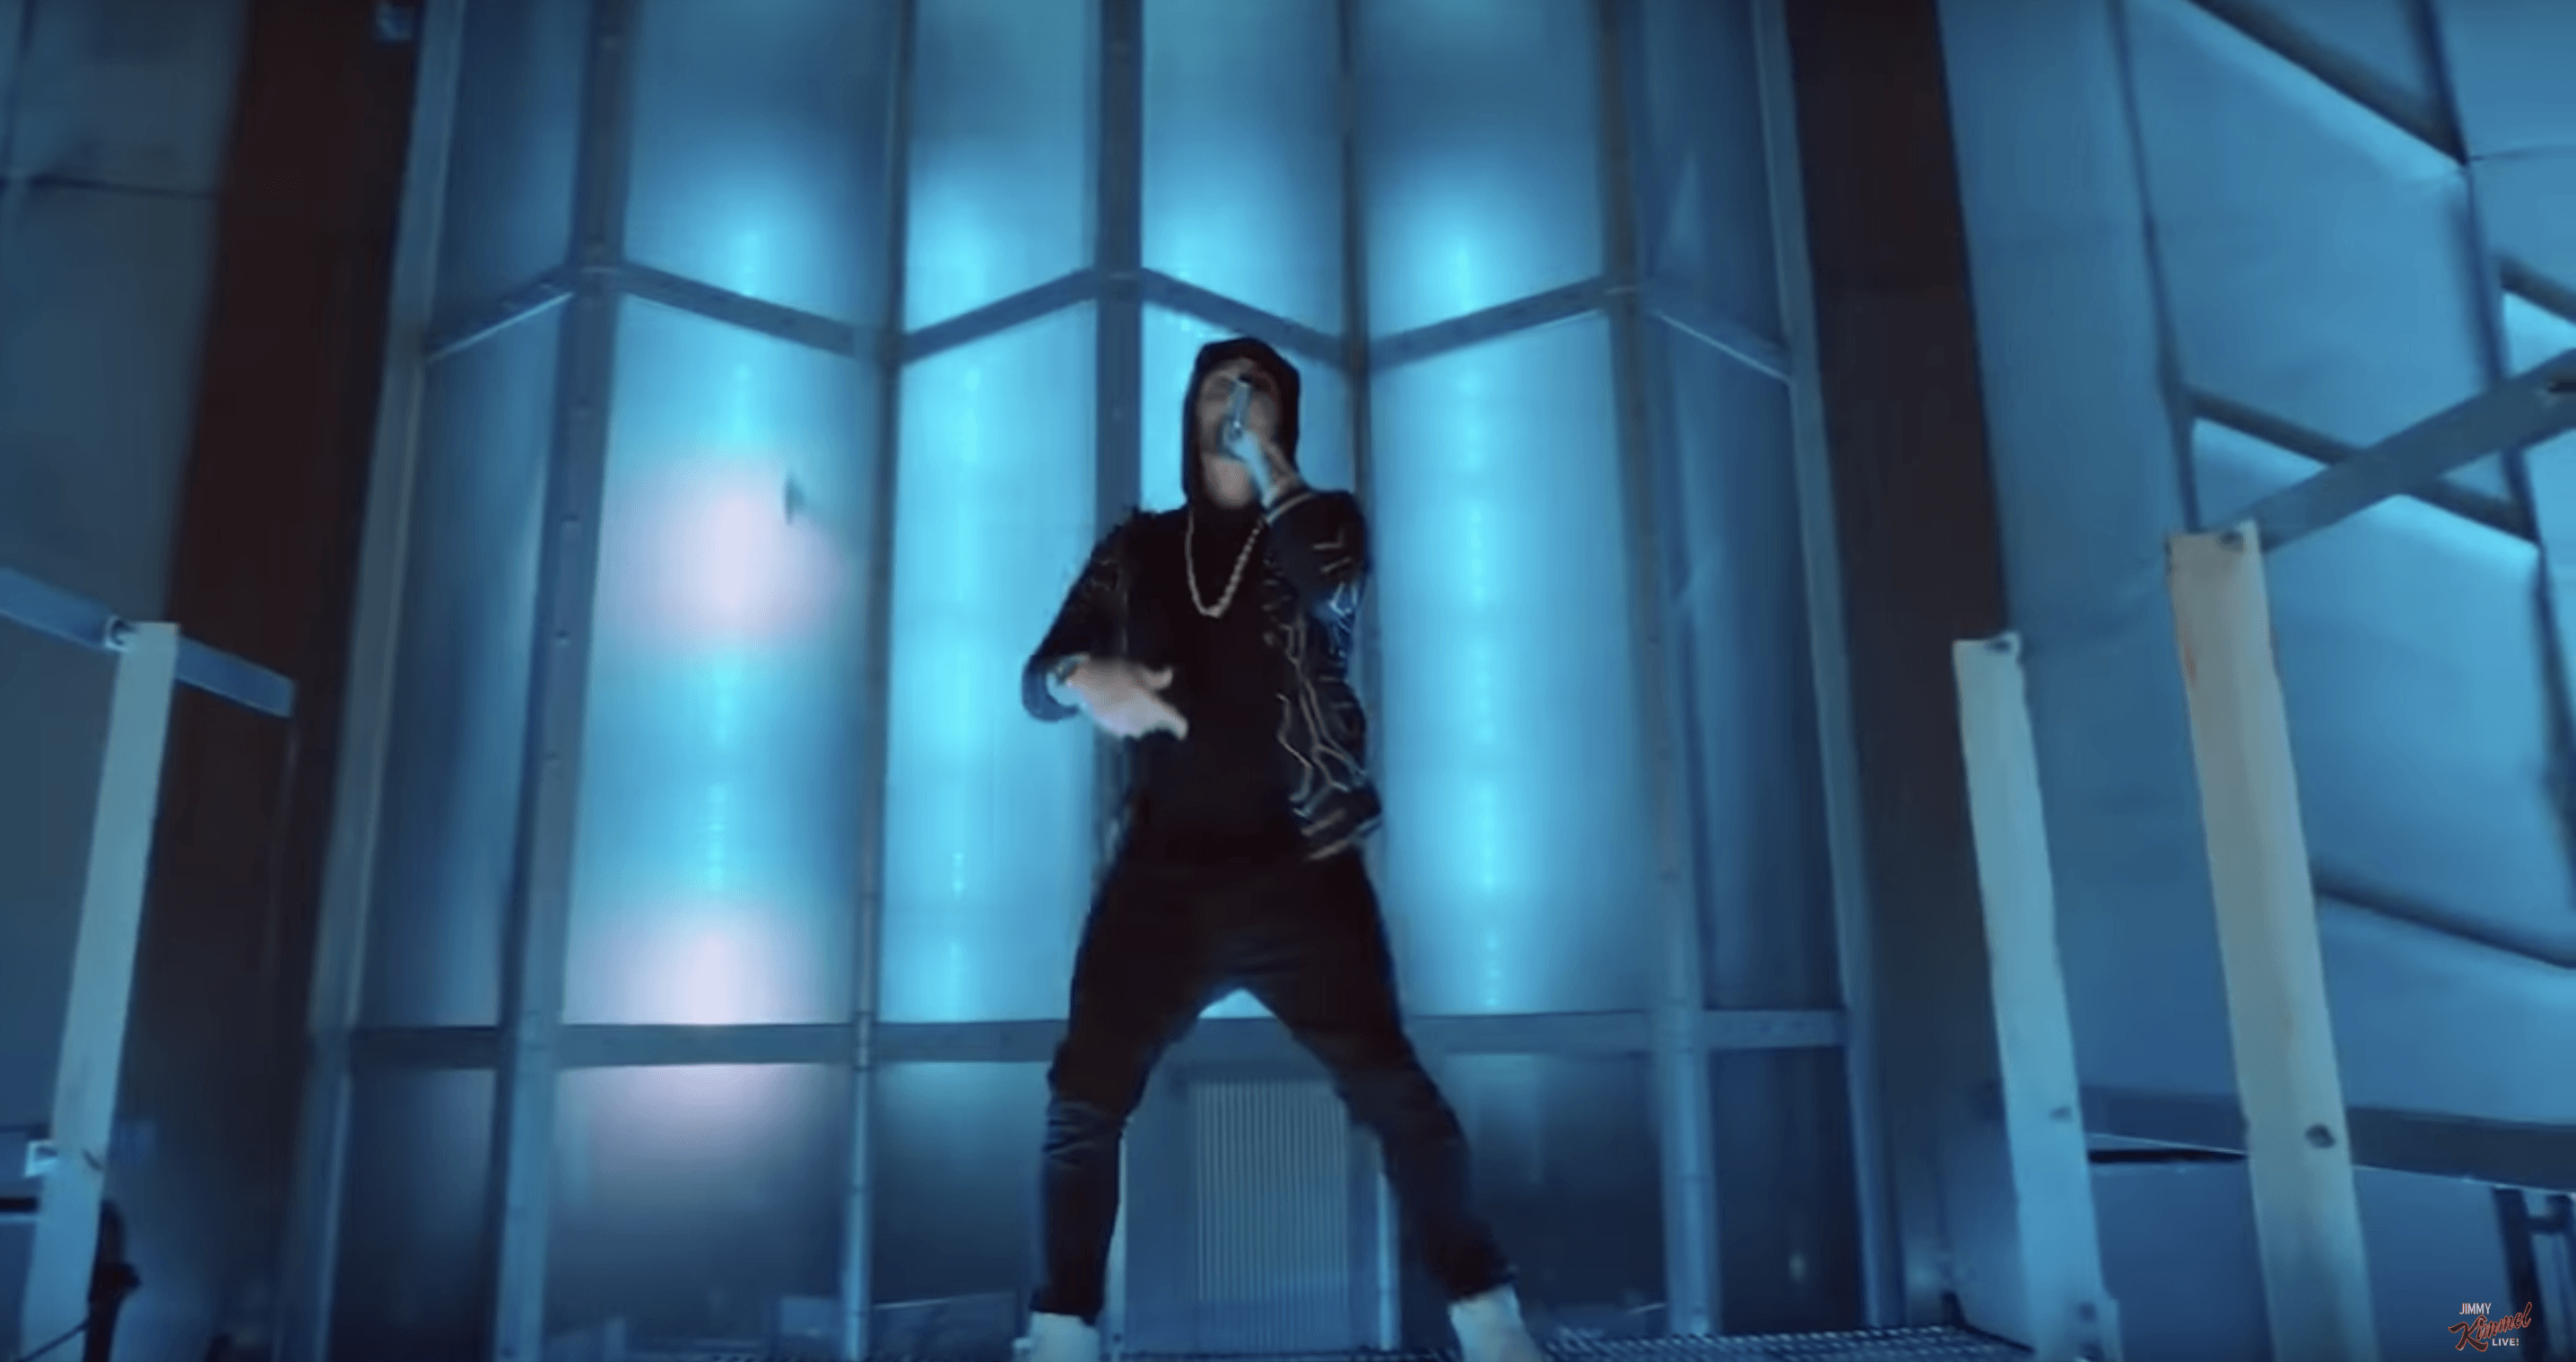 Watch Eminem's Empire State Building performance, shot on Google's